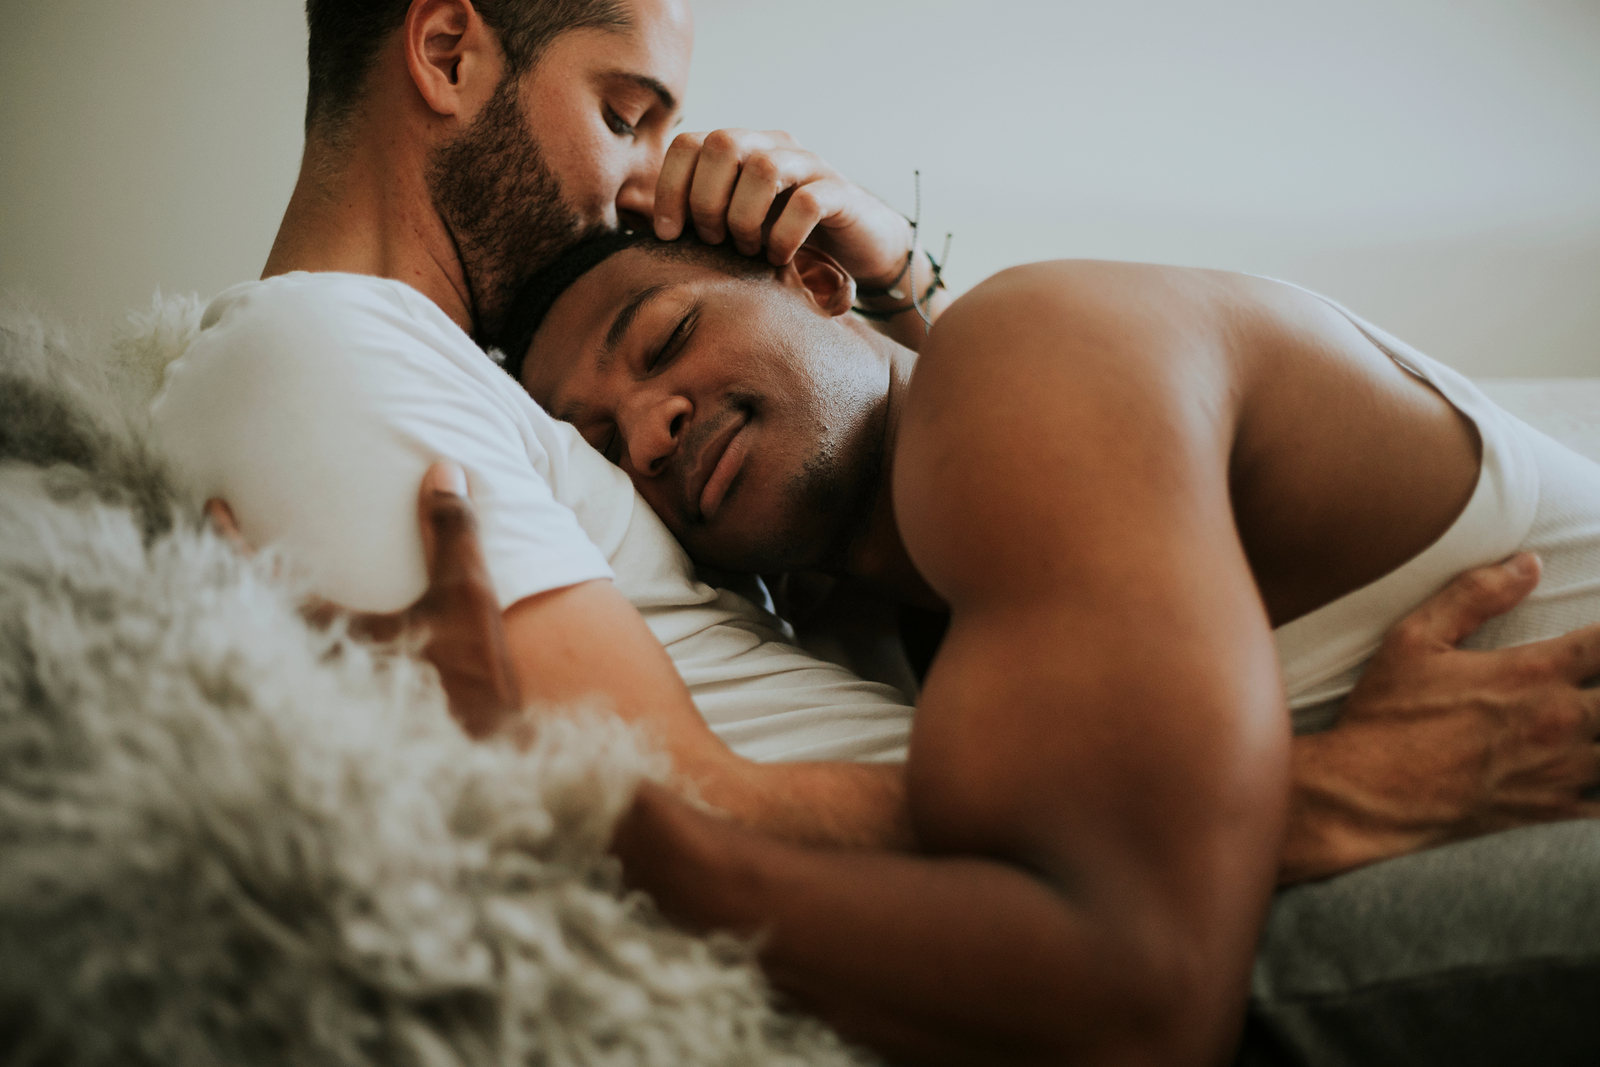 Black gay couple cuddling on bed together. Being in a space with a couples therapist who understands you and your normal life experiences matters. Try marriage counseling and couples therapy with us soon. Find LGBTQ couples counseling near me here!